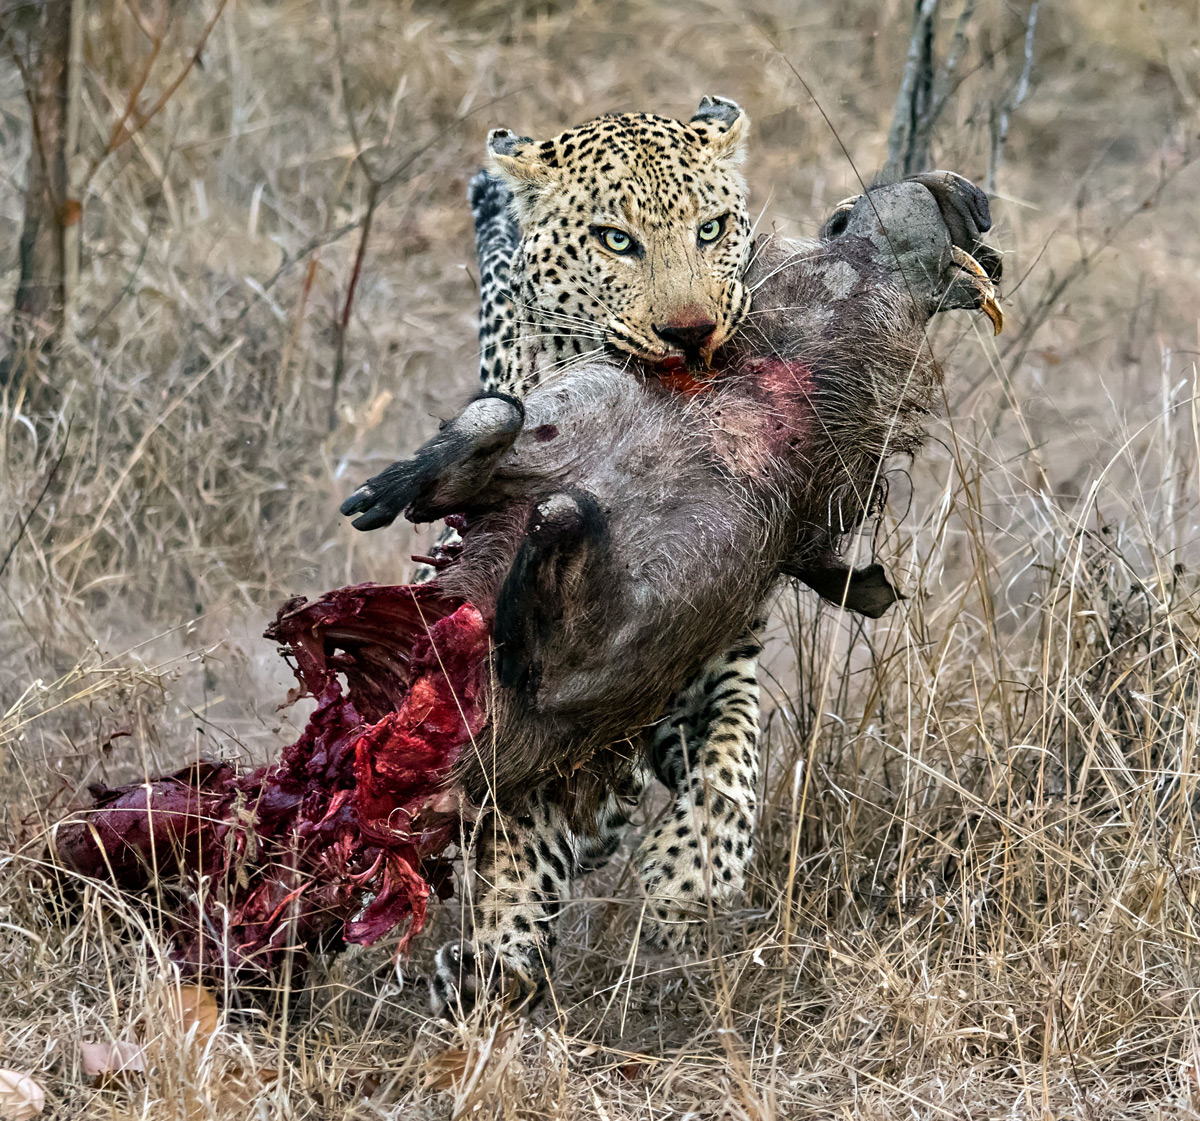 “This male leopard retrieved his warthog kill from a spotted hyena. Here he is running with the kill away from the hyena towards a tree.” – Kruger National Park, South Africa © Ernest Porter